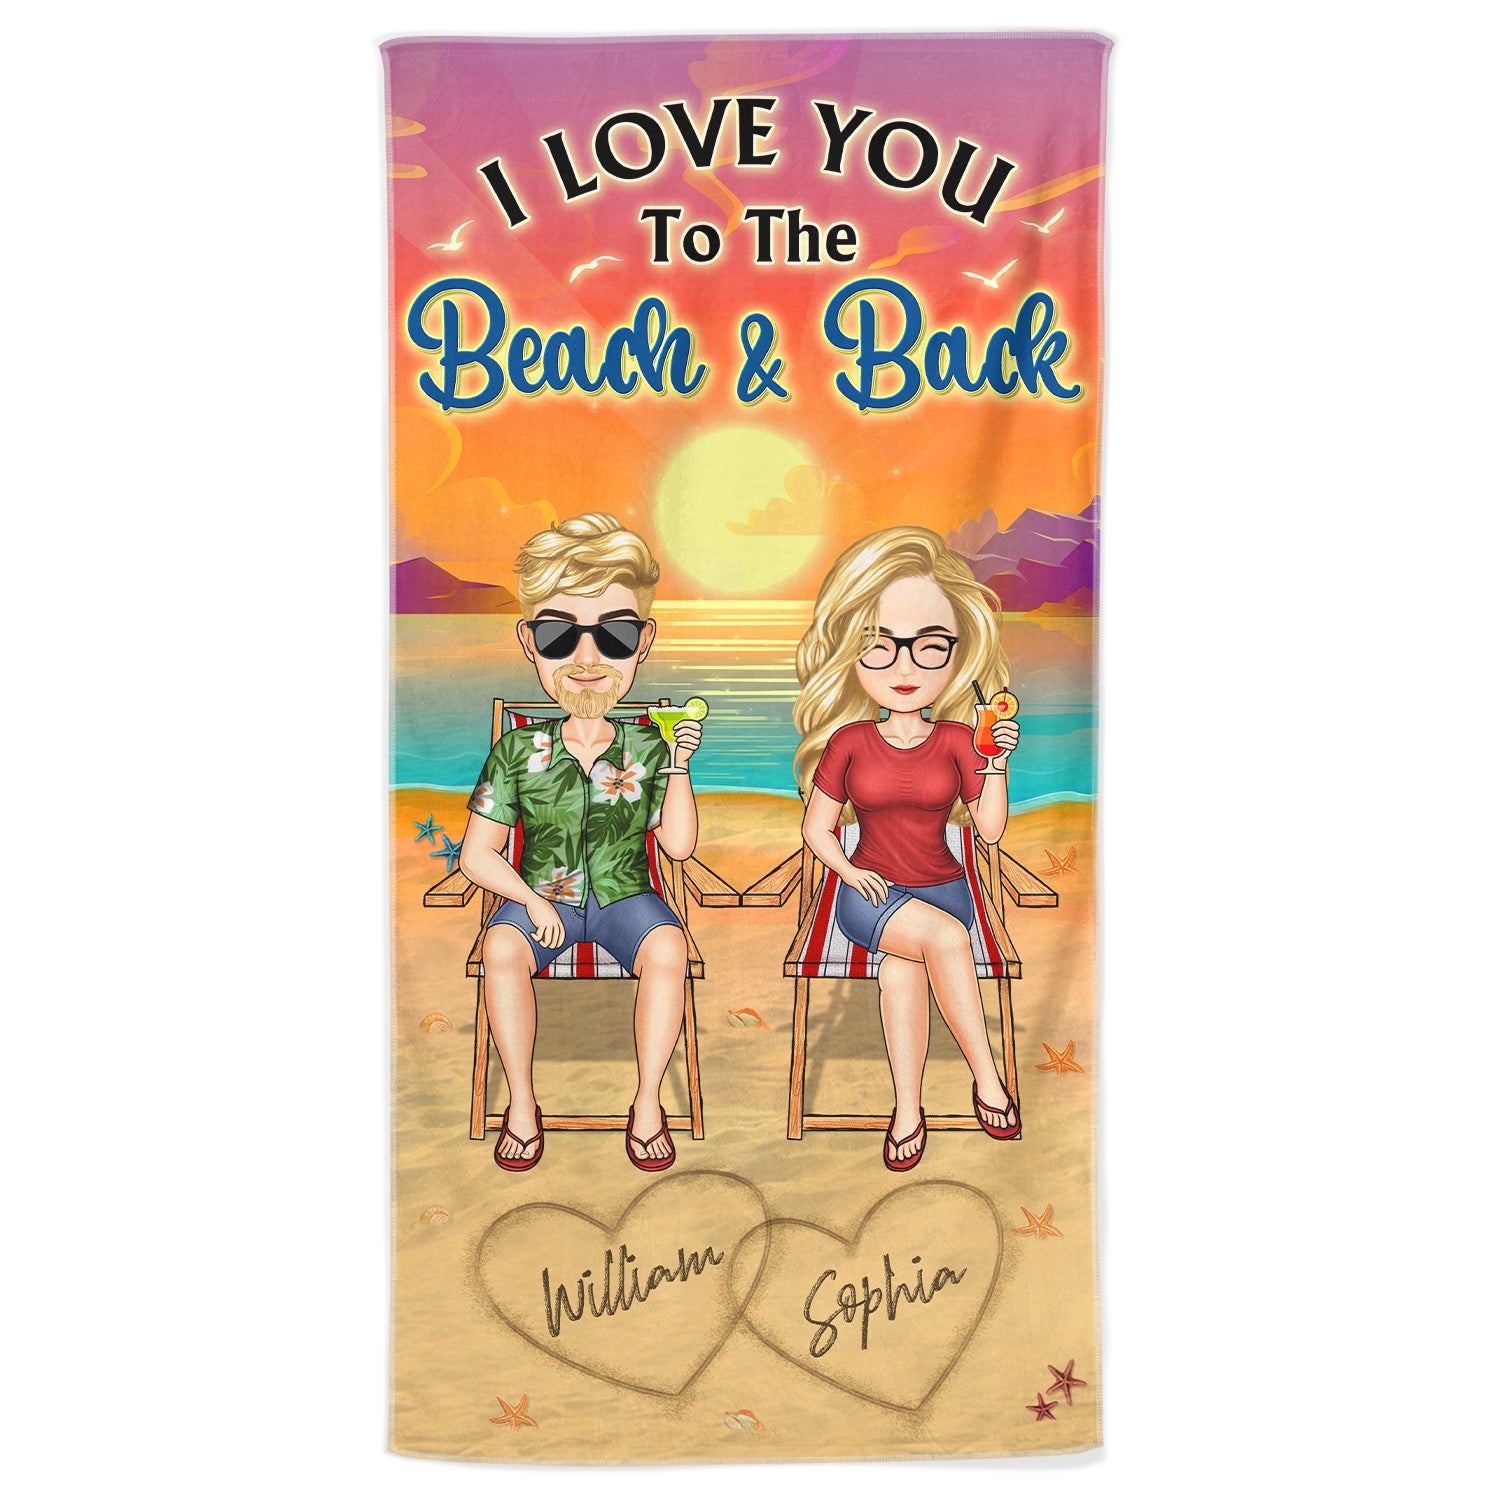 I Love You To The Beach And Back Traveling Beach Swimming Picnic Vacation - Birthday, Funny Gift For Her, Him, Couples, Family - Personalized Custom Beach Towel